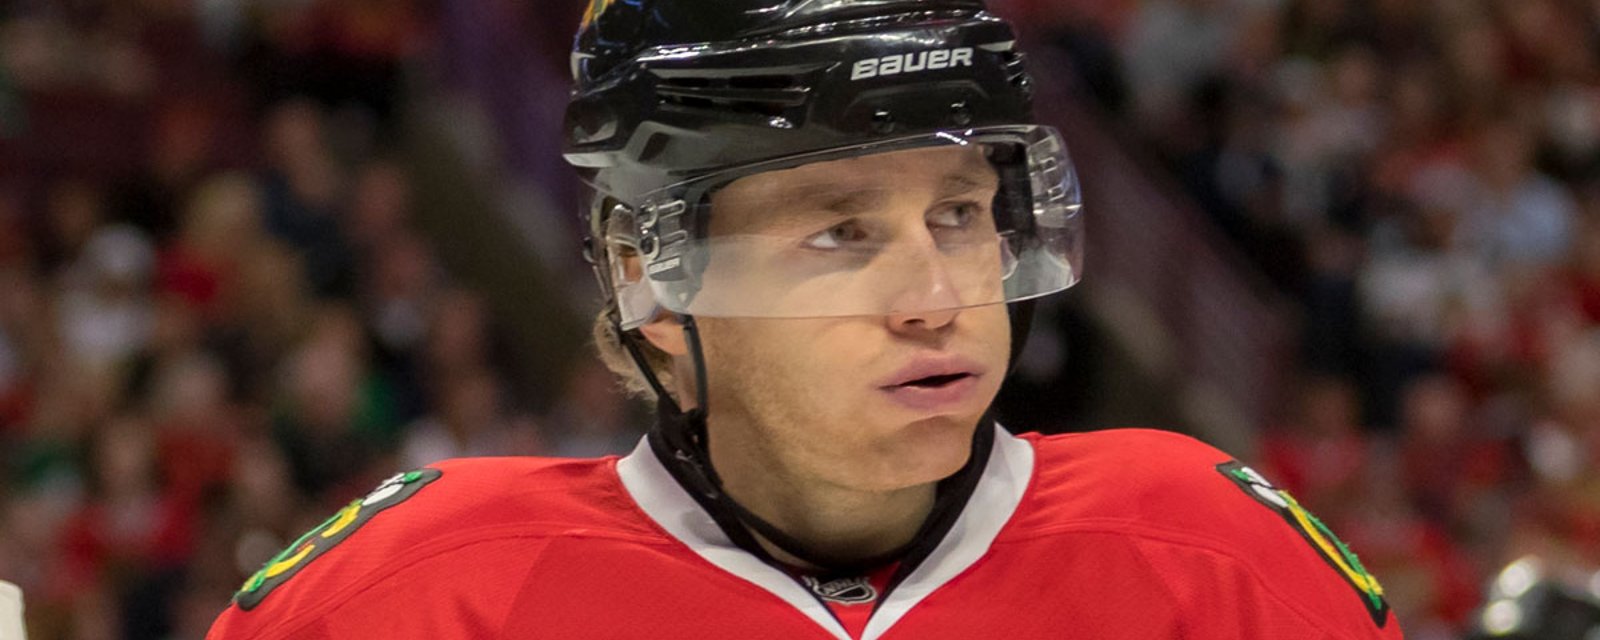 Breaking: Patrick Kane makes an absolutely shocking declaration about the Blackhawks